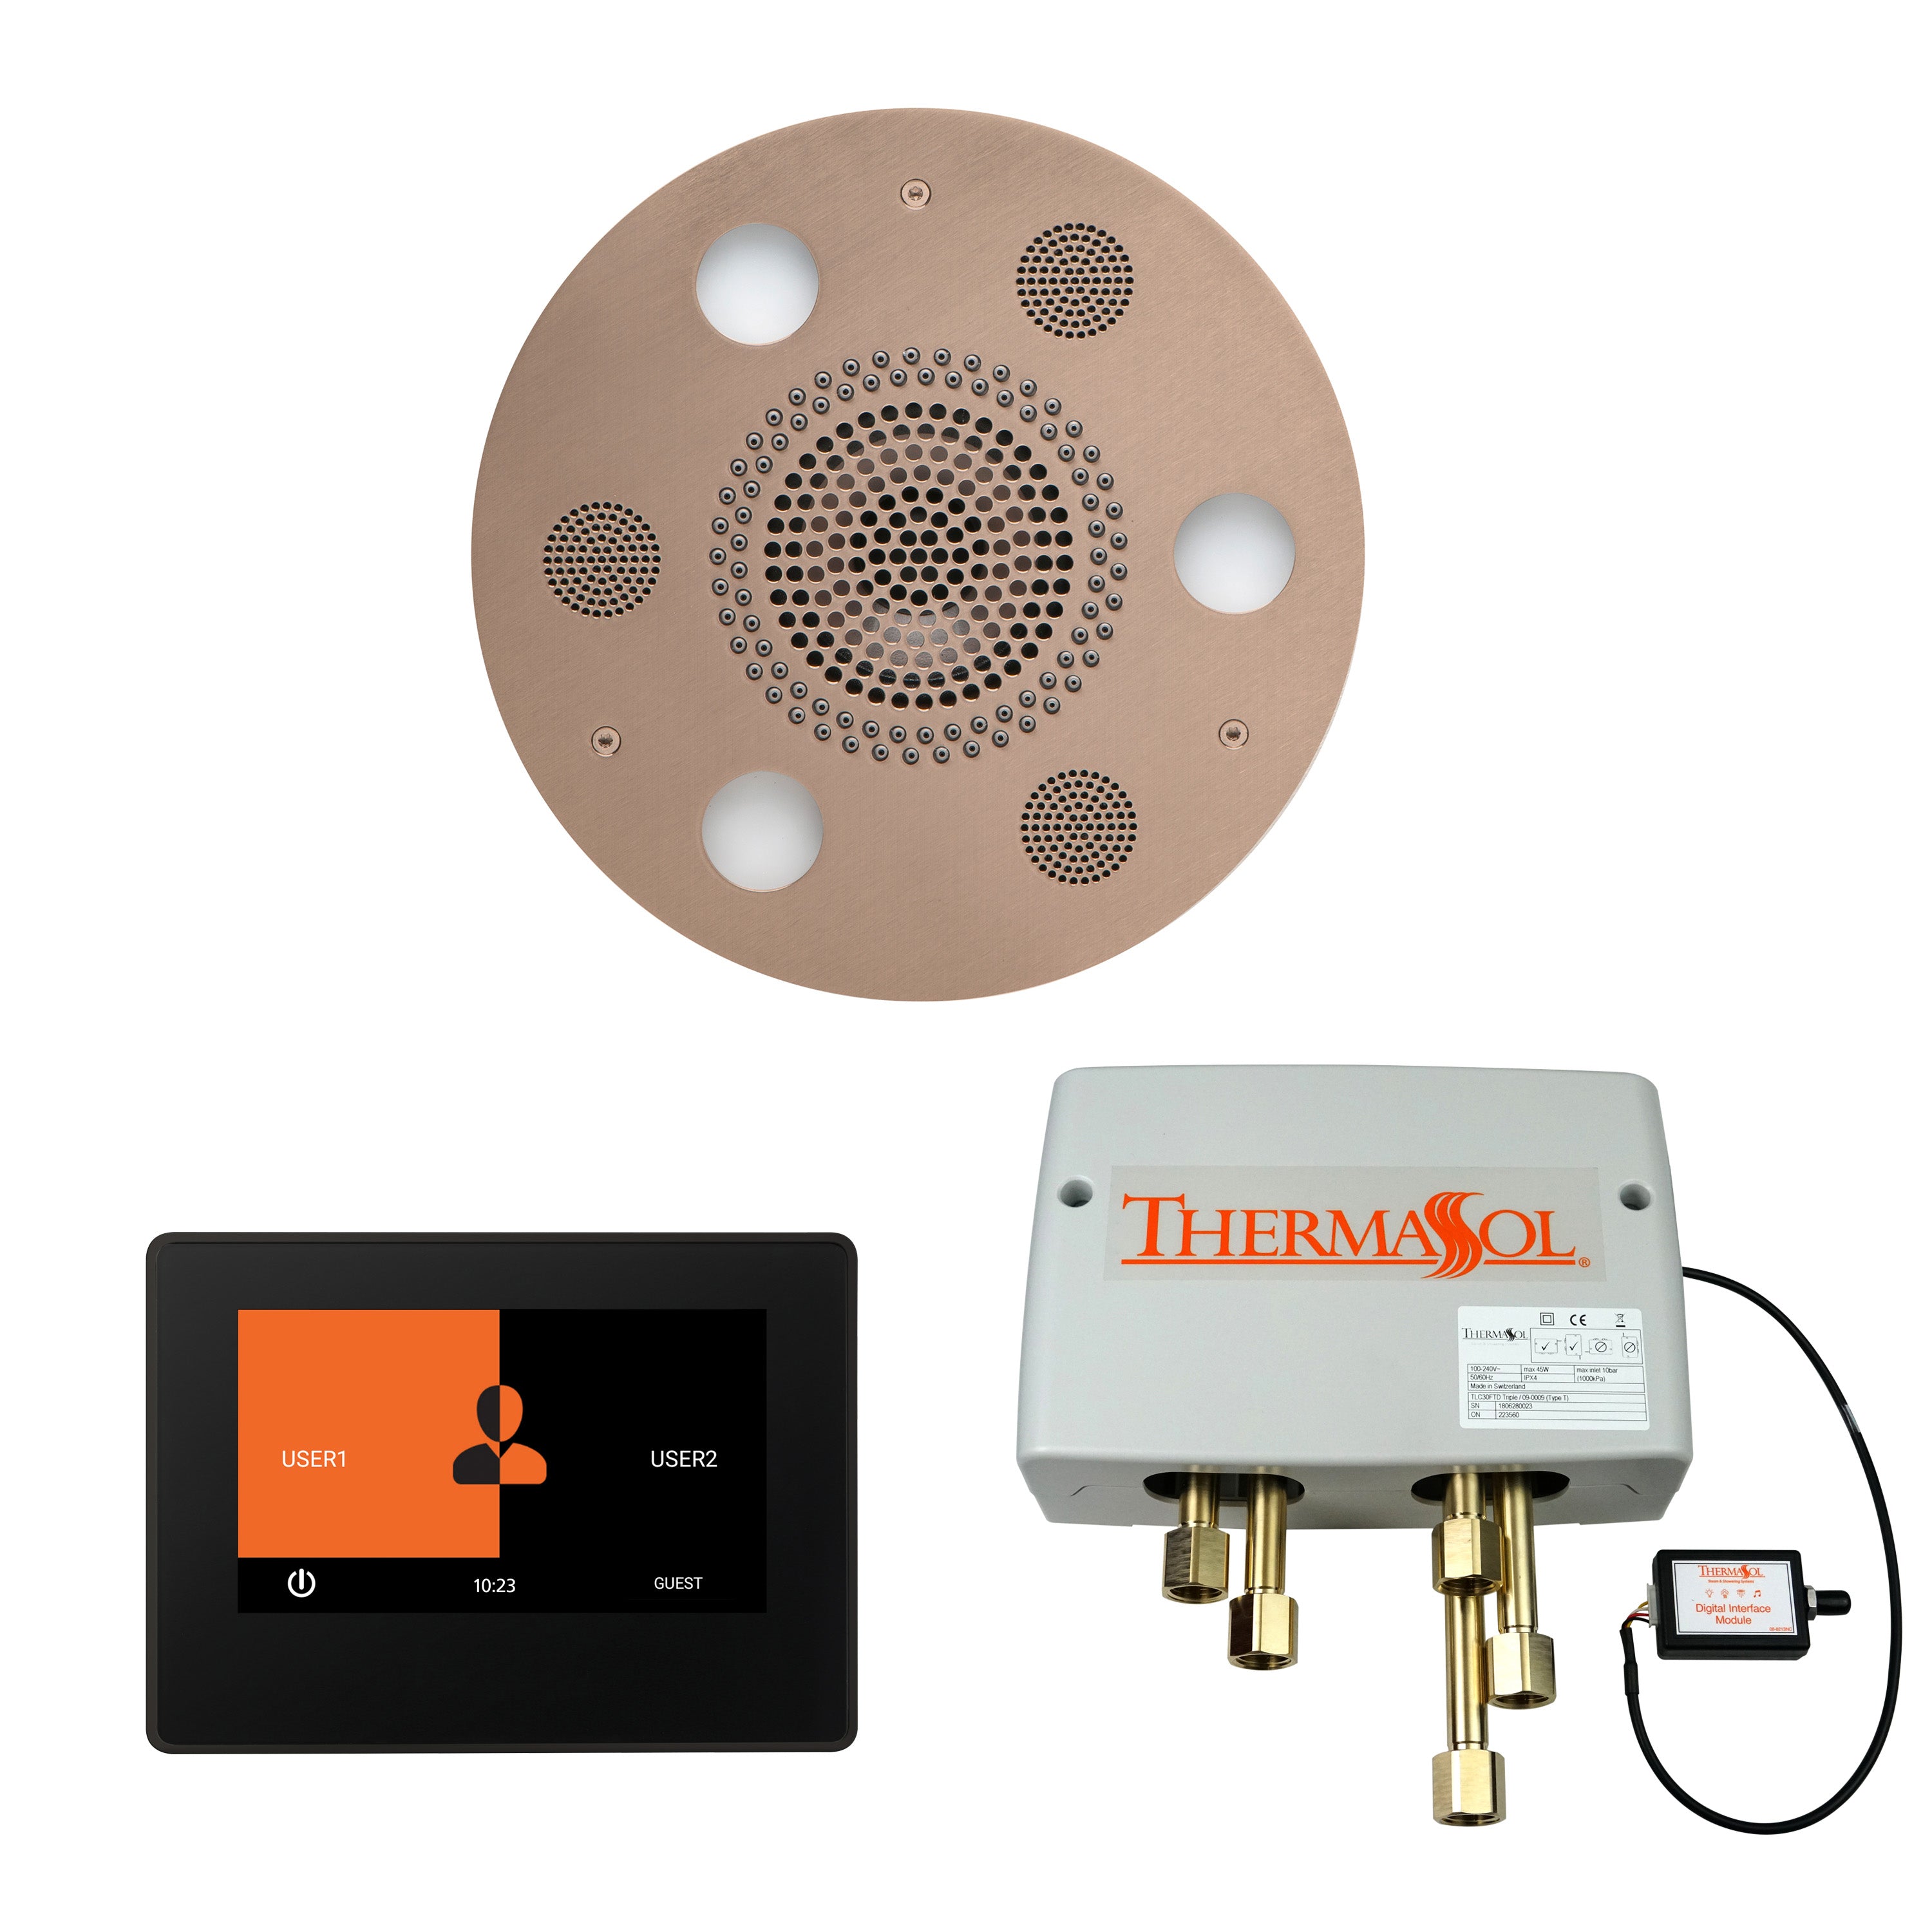 ThermaSol Wellness Shower Package w/ 7" ThermaTouch Control